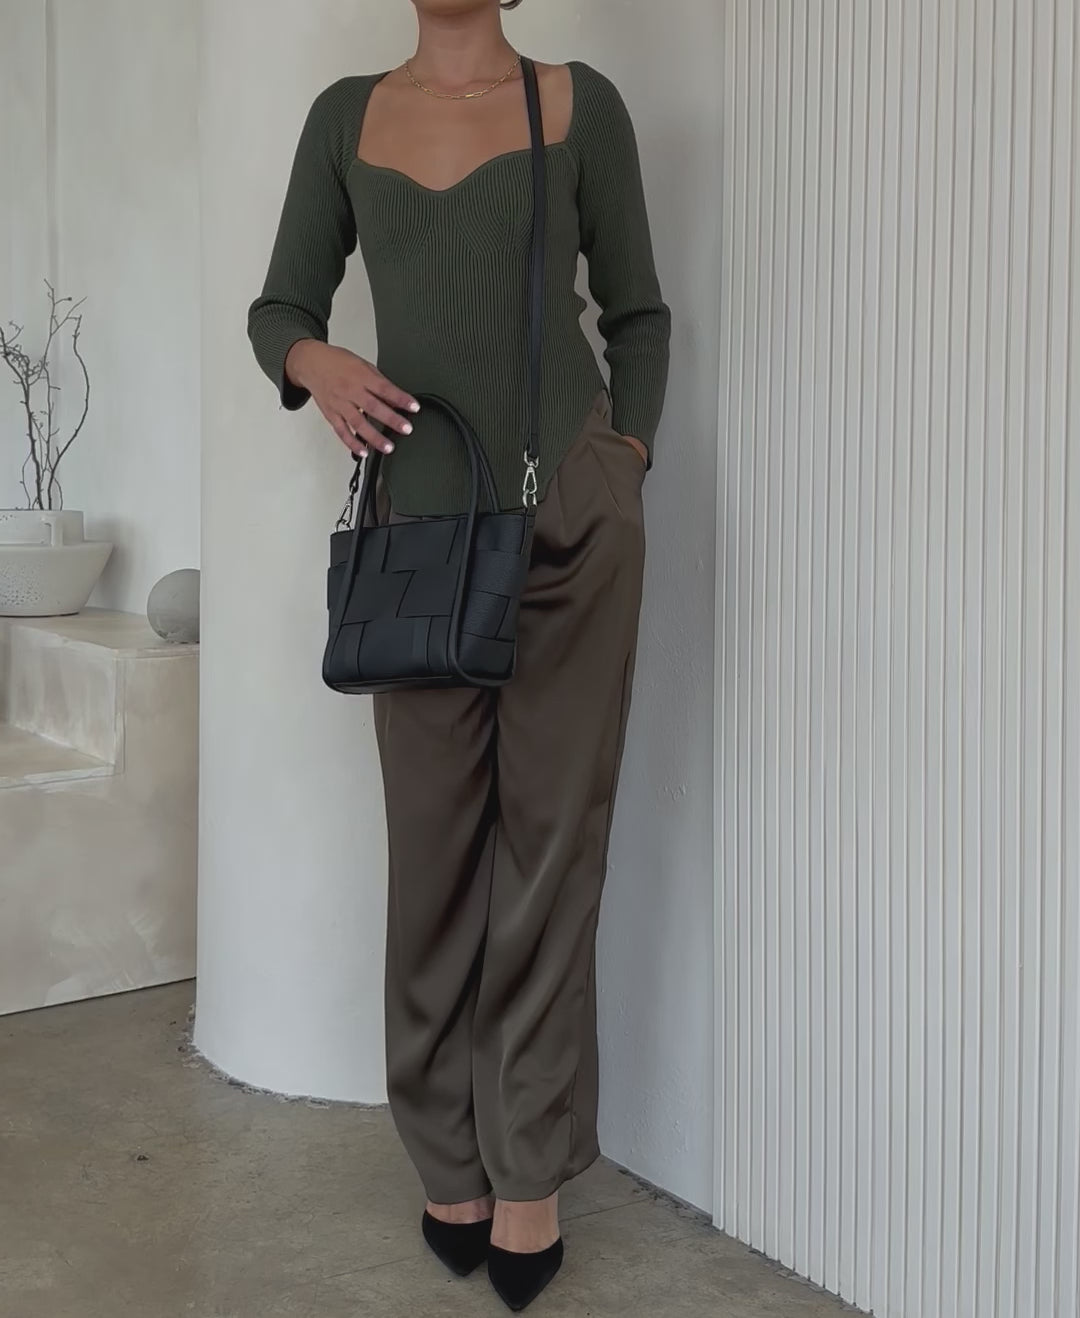 A model wearing a small woven wide strap tote bag against a white wall.